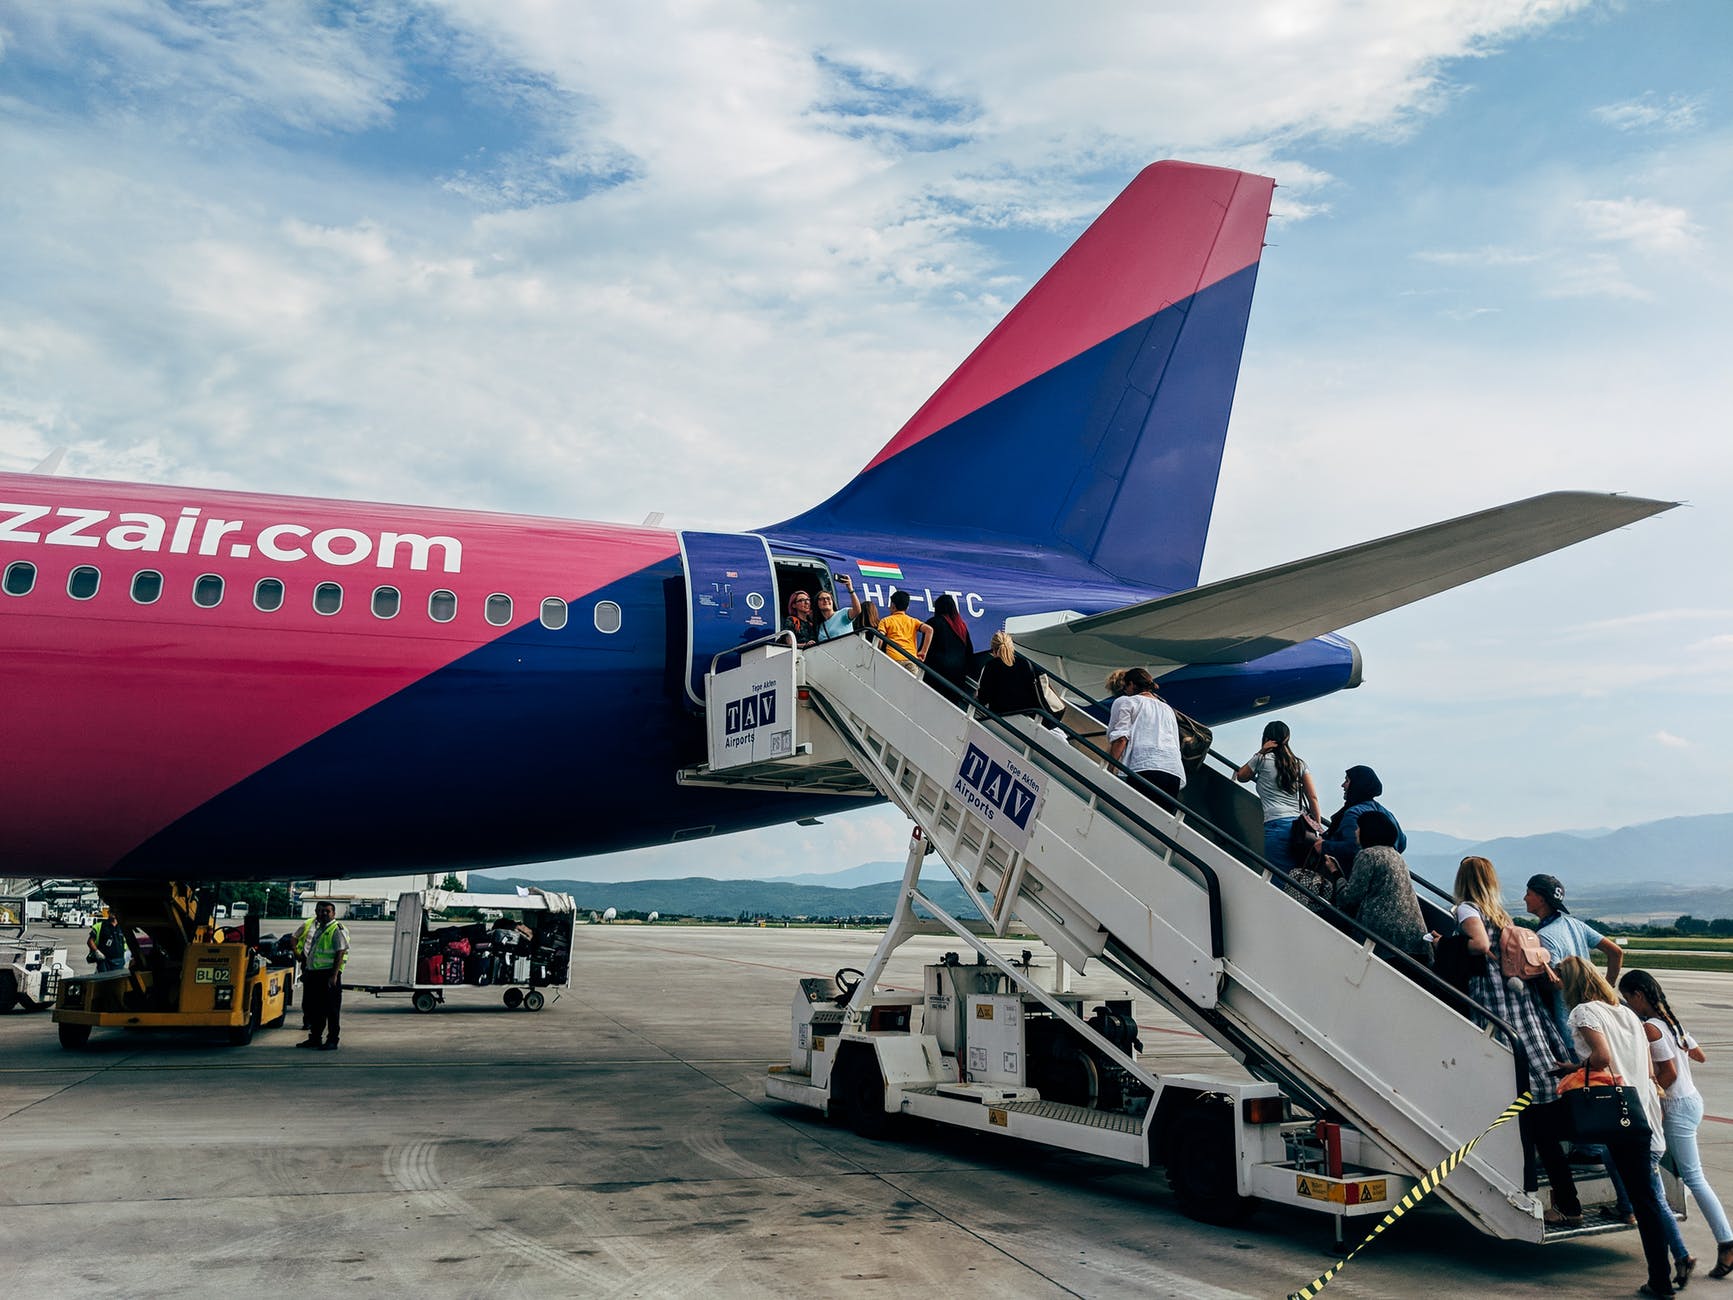 Which? Survey: Wizz Air is the “Worst Short-Haul Airline”